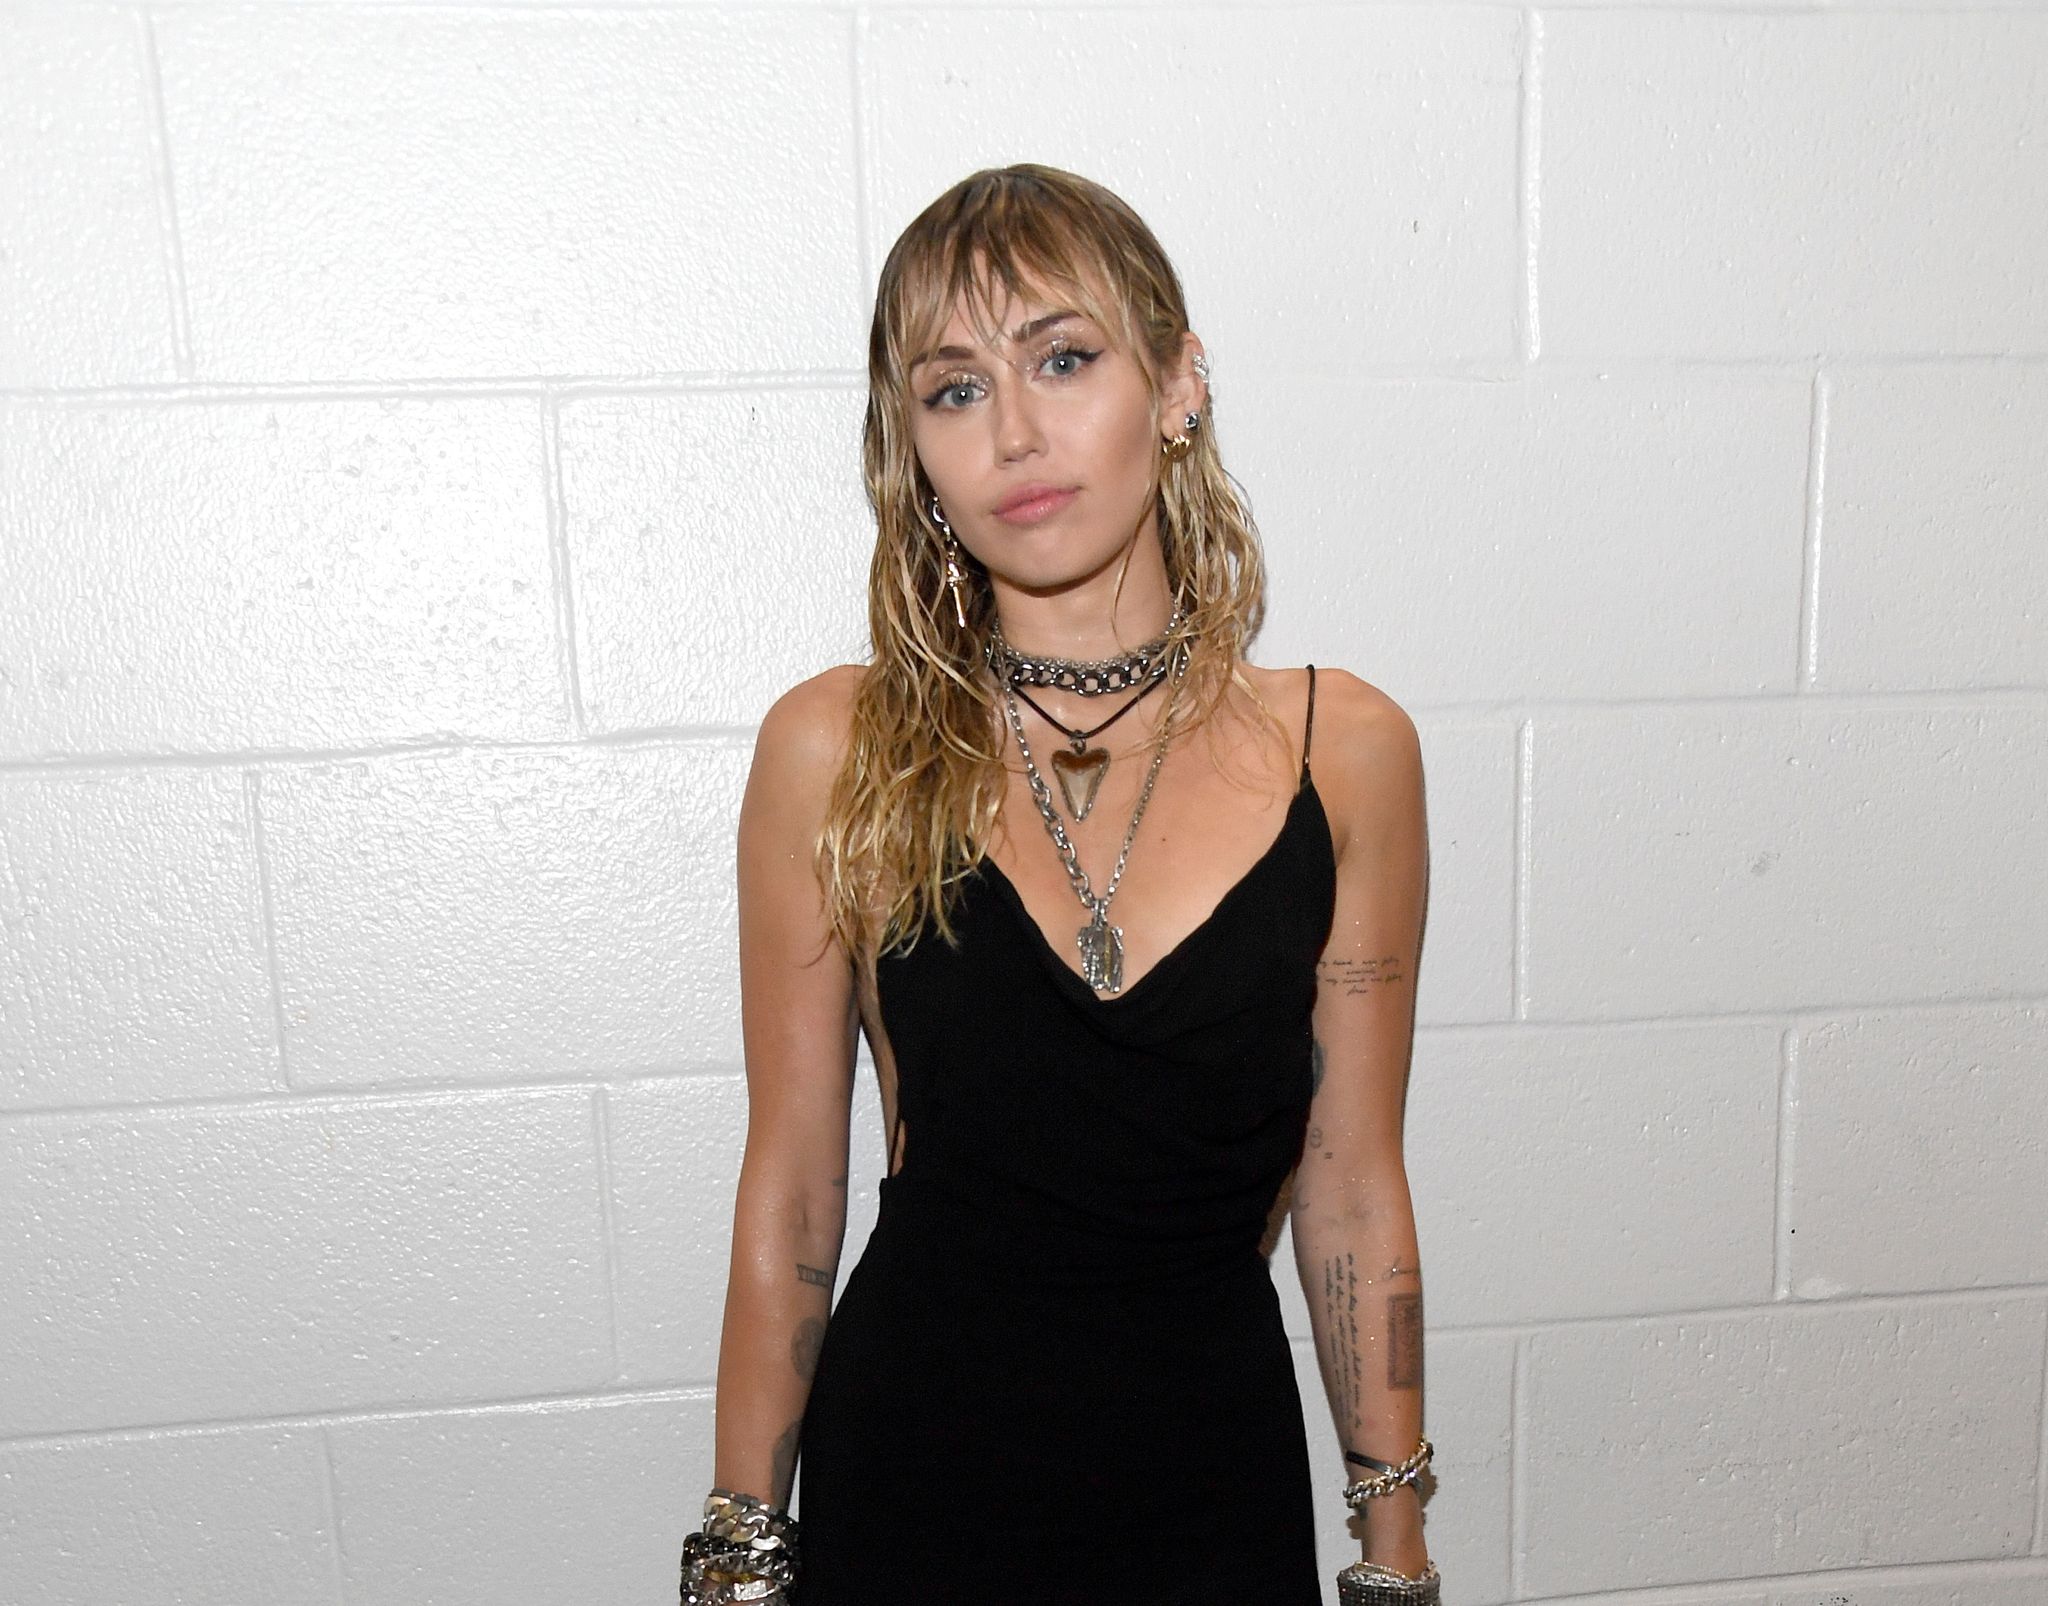 miley cyrus opens up about being six months sober and family addiction